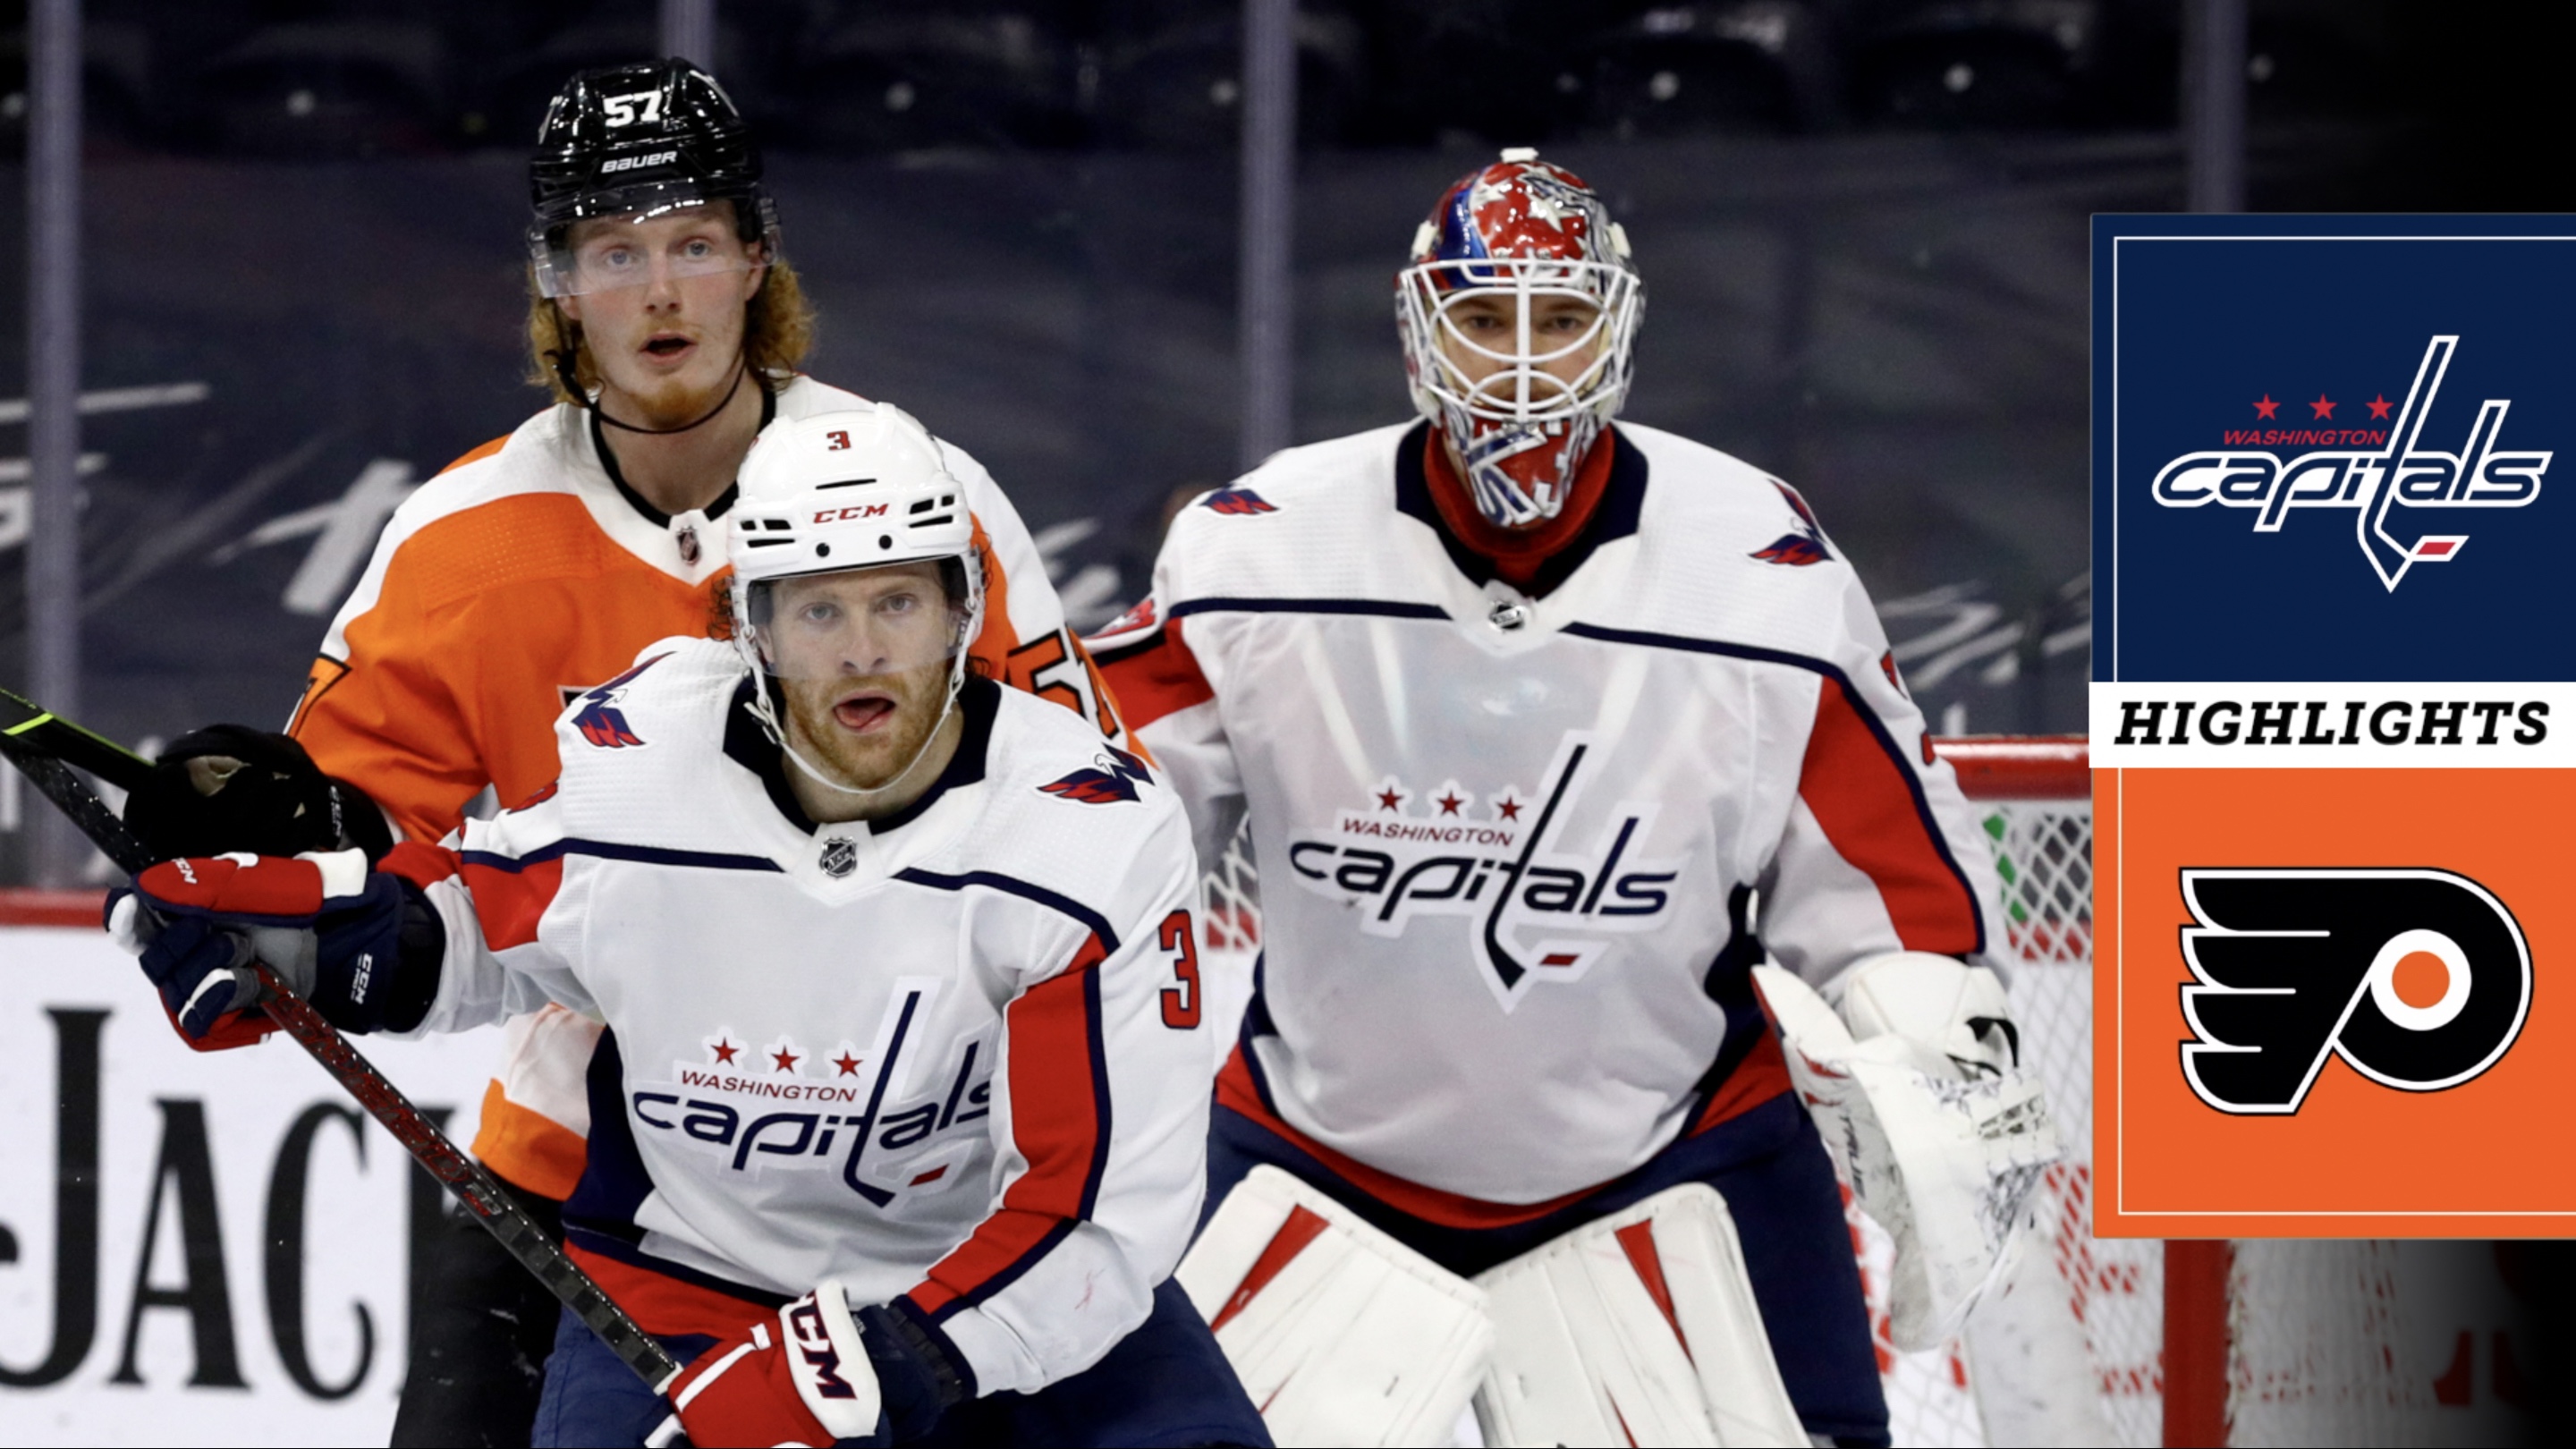 Ovechkin To Play in Capitals' Second Preseason Game